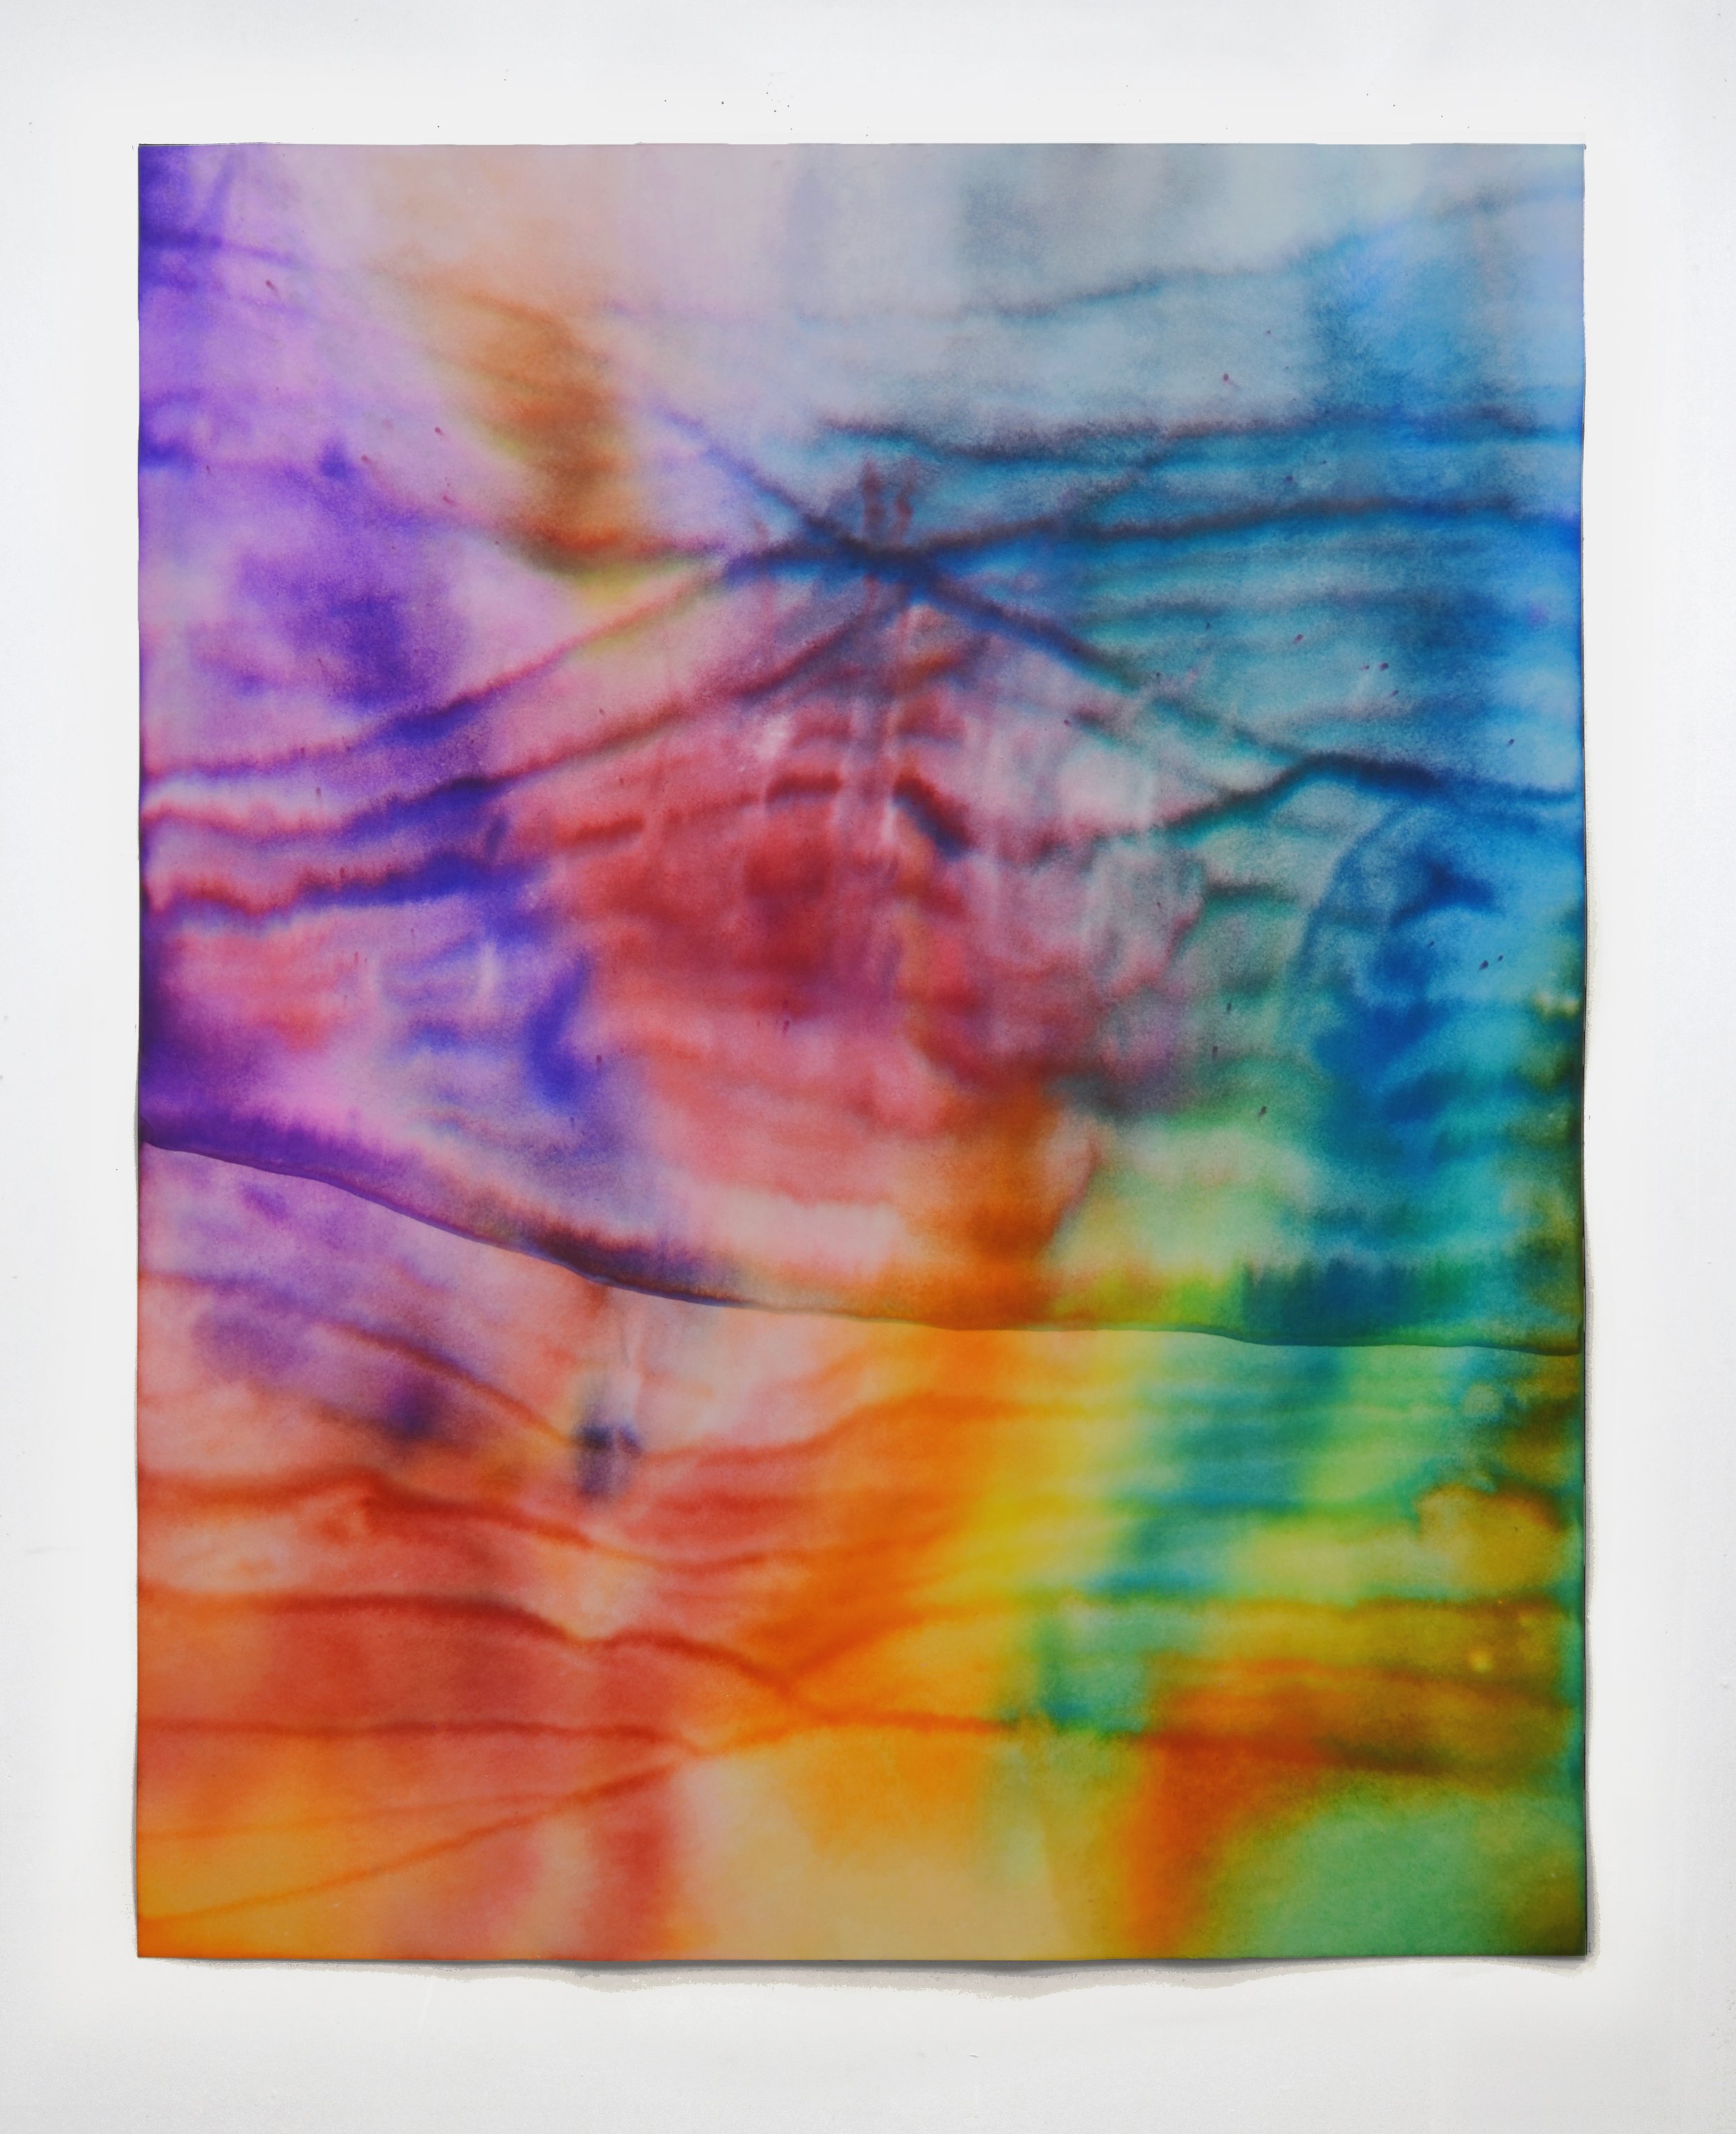  May 1 2023 (Colores de ti), 2023, ink on chromatography paper soaked in Advil/Codeine solution, 40 x 30 inches    BEN WEINER: MOOD DRAWINGS AT MARK MOORE FINE ART, LOS ANGELES, CA  Mark Moore Fine Art is pleased to present Ben Weiner: Mood Drawings,